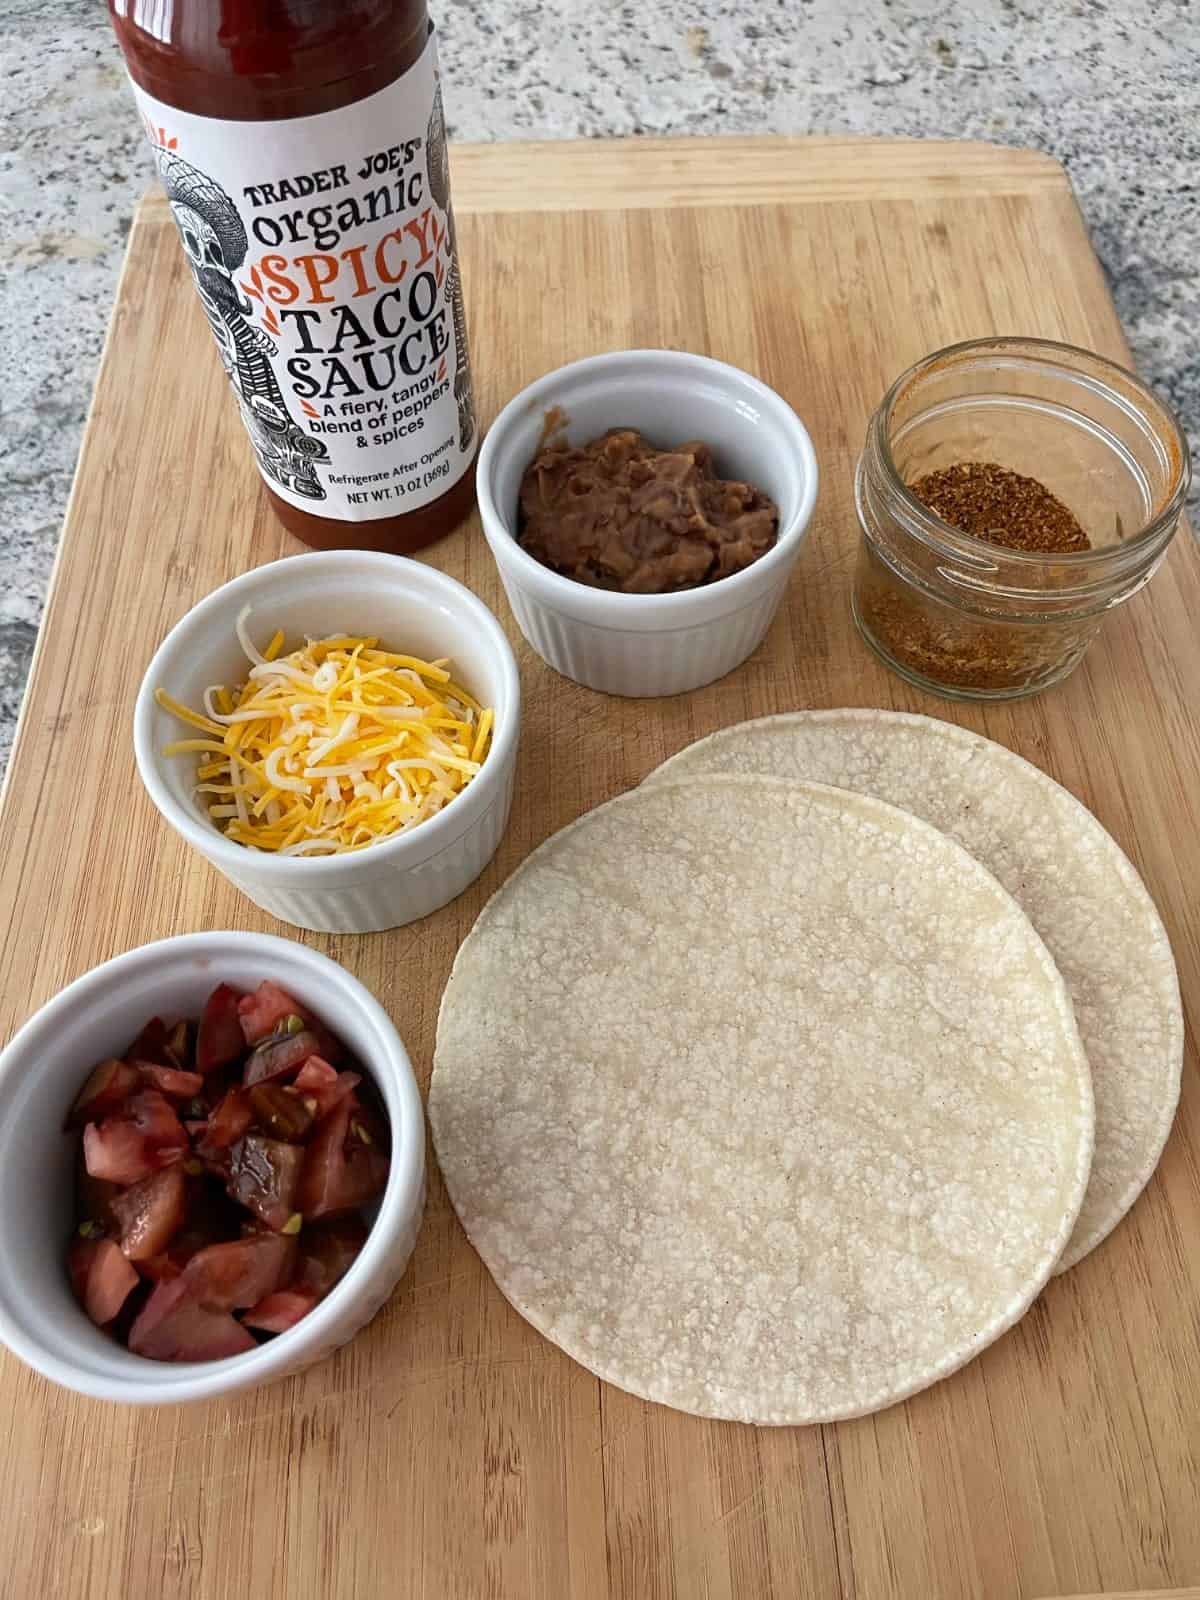 Ingredients including taco sauce, shredded cheese, refried beans, taco seasoning, chopped tomatoes and two corn tortillas on bamboo cutting board.